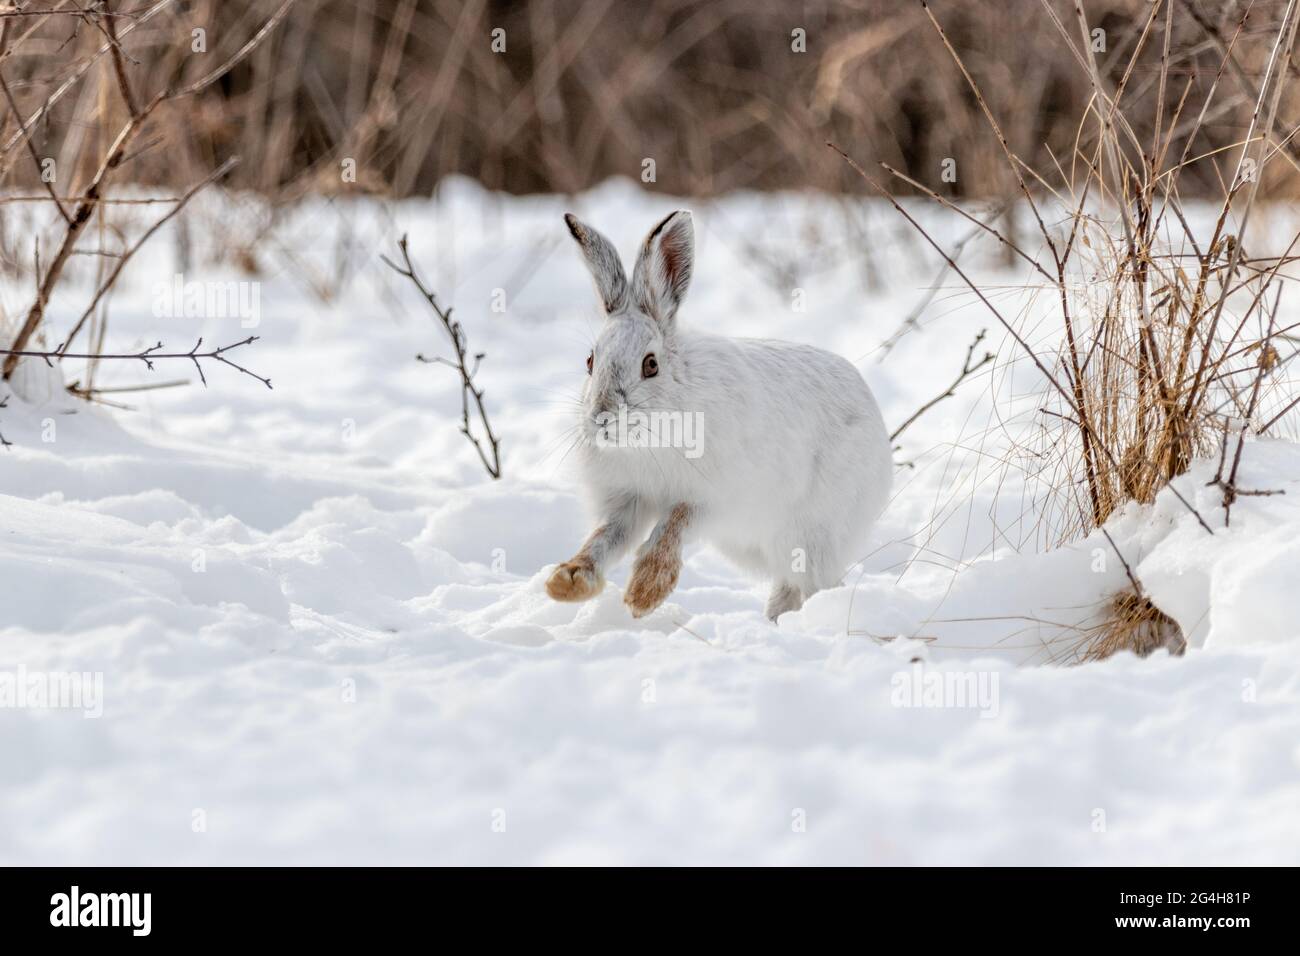 White snowshoe hare running in the snow in Canada. Mostly white with cute brown feet. Stock Photo